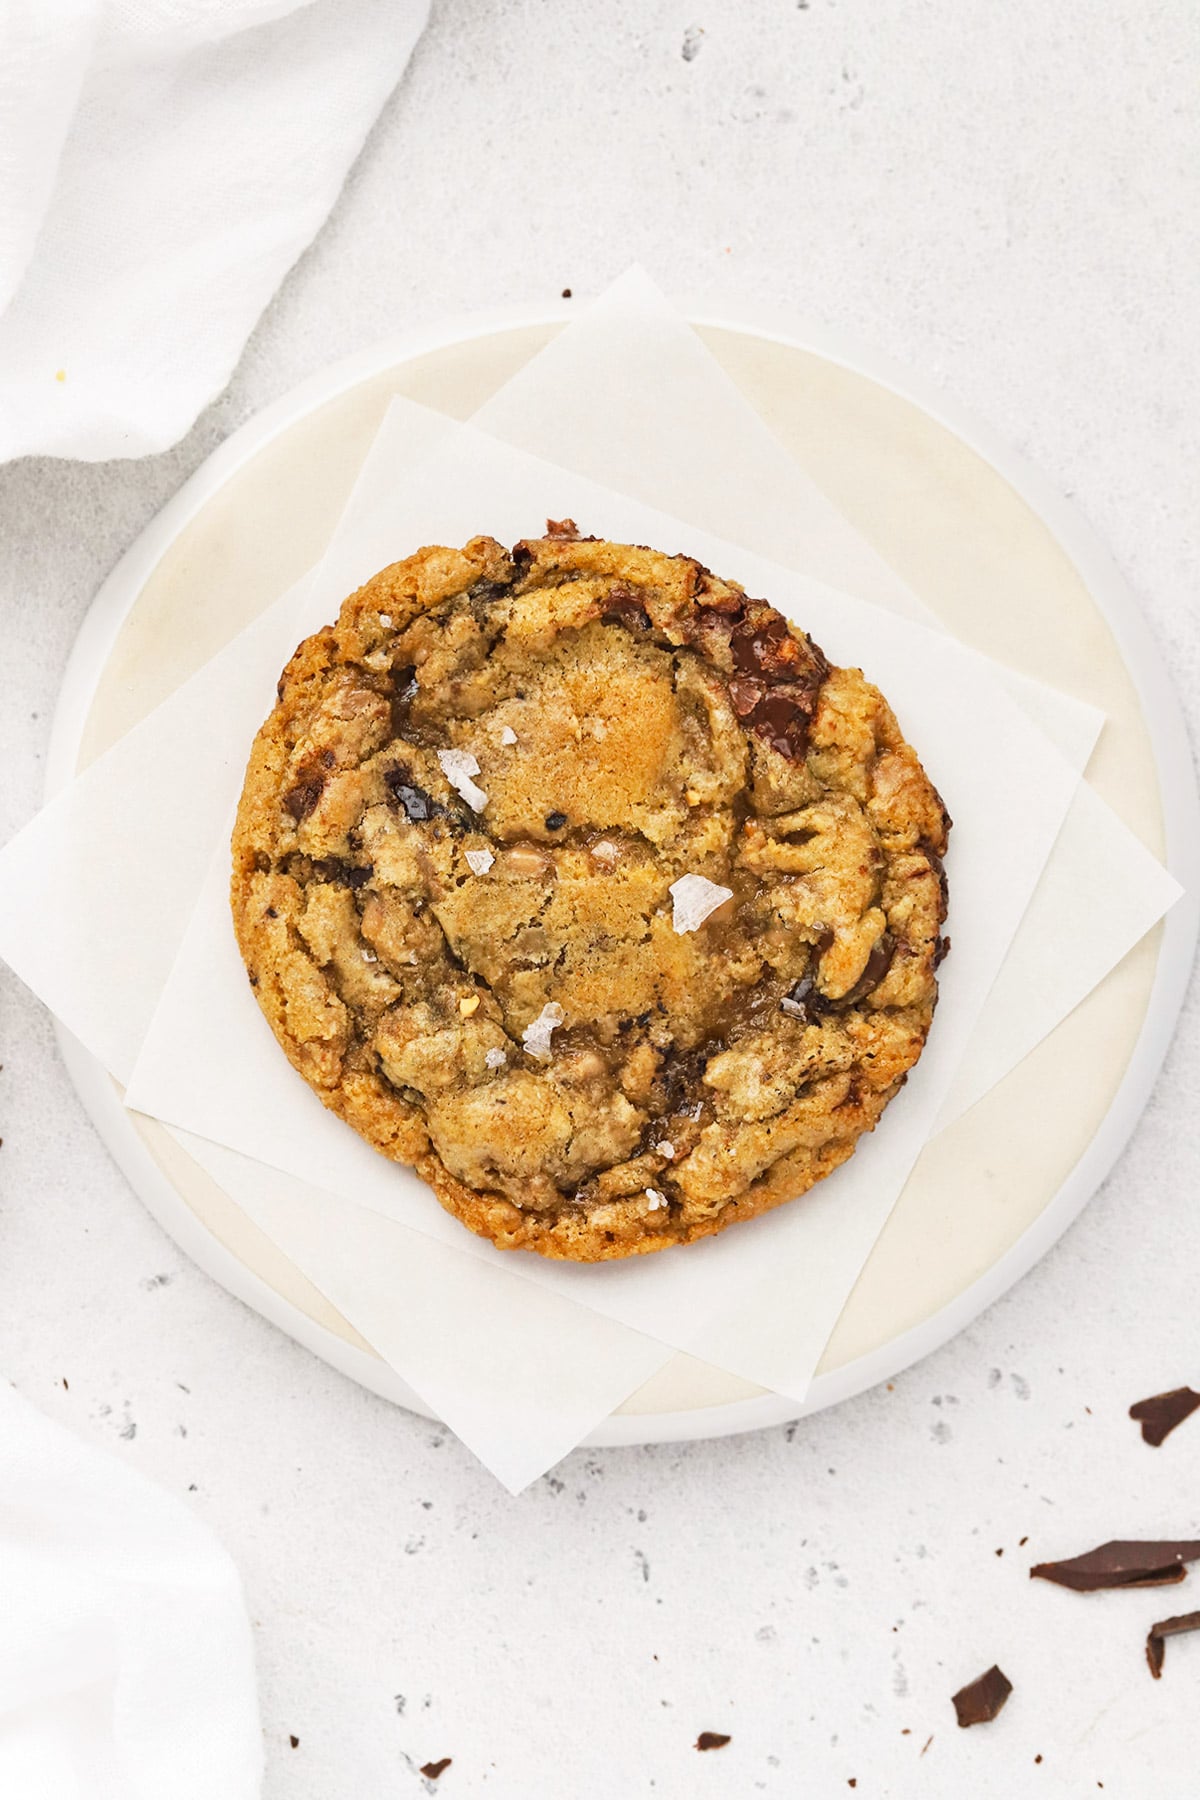 Overhead view of a golden gluten-free brown butter toffee chocolate chip cookie on a plate